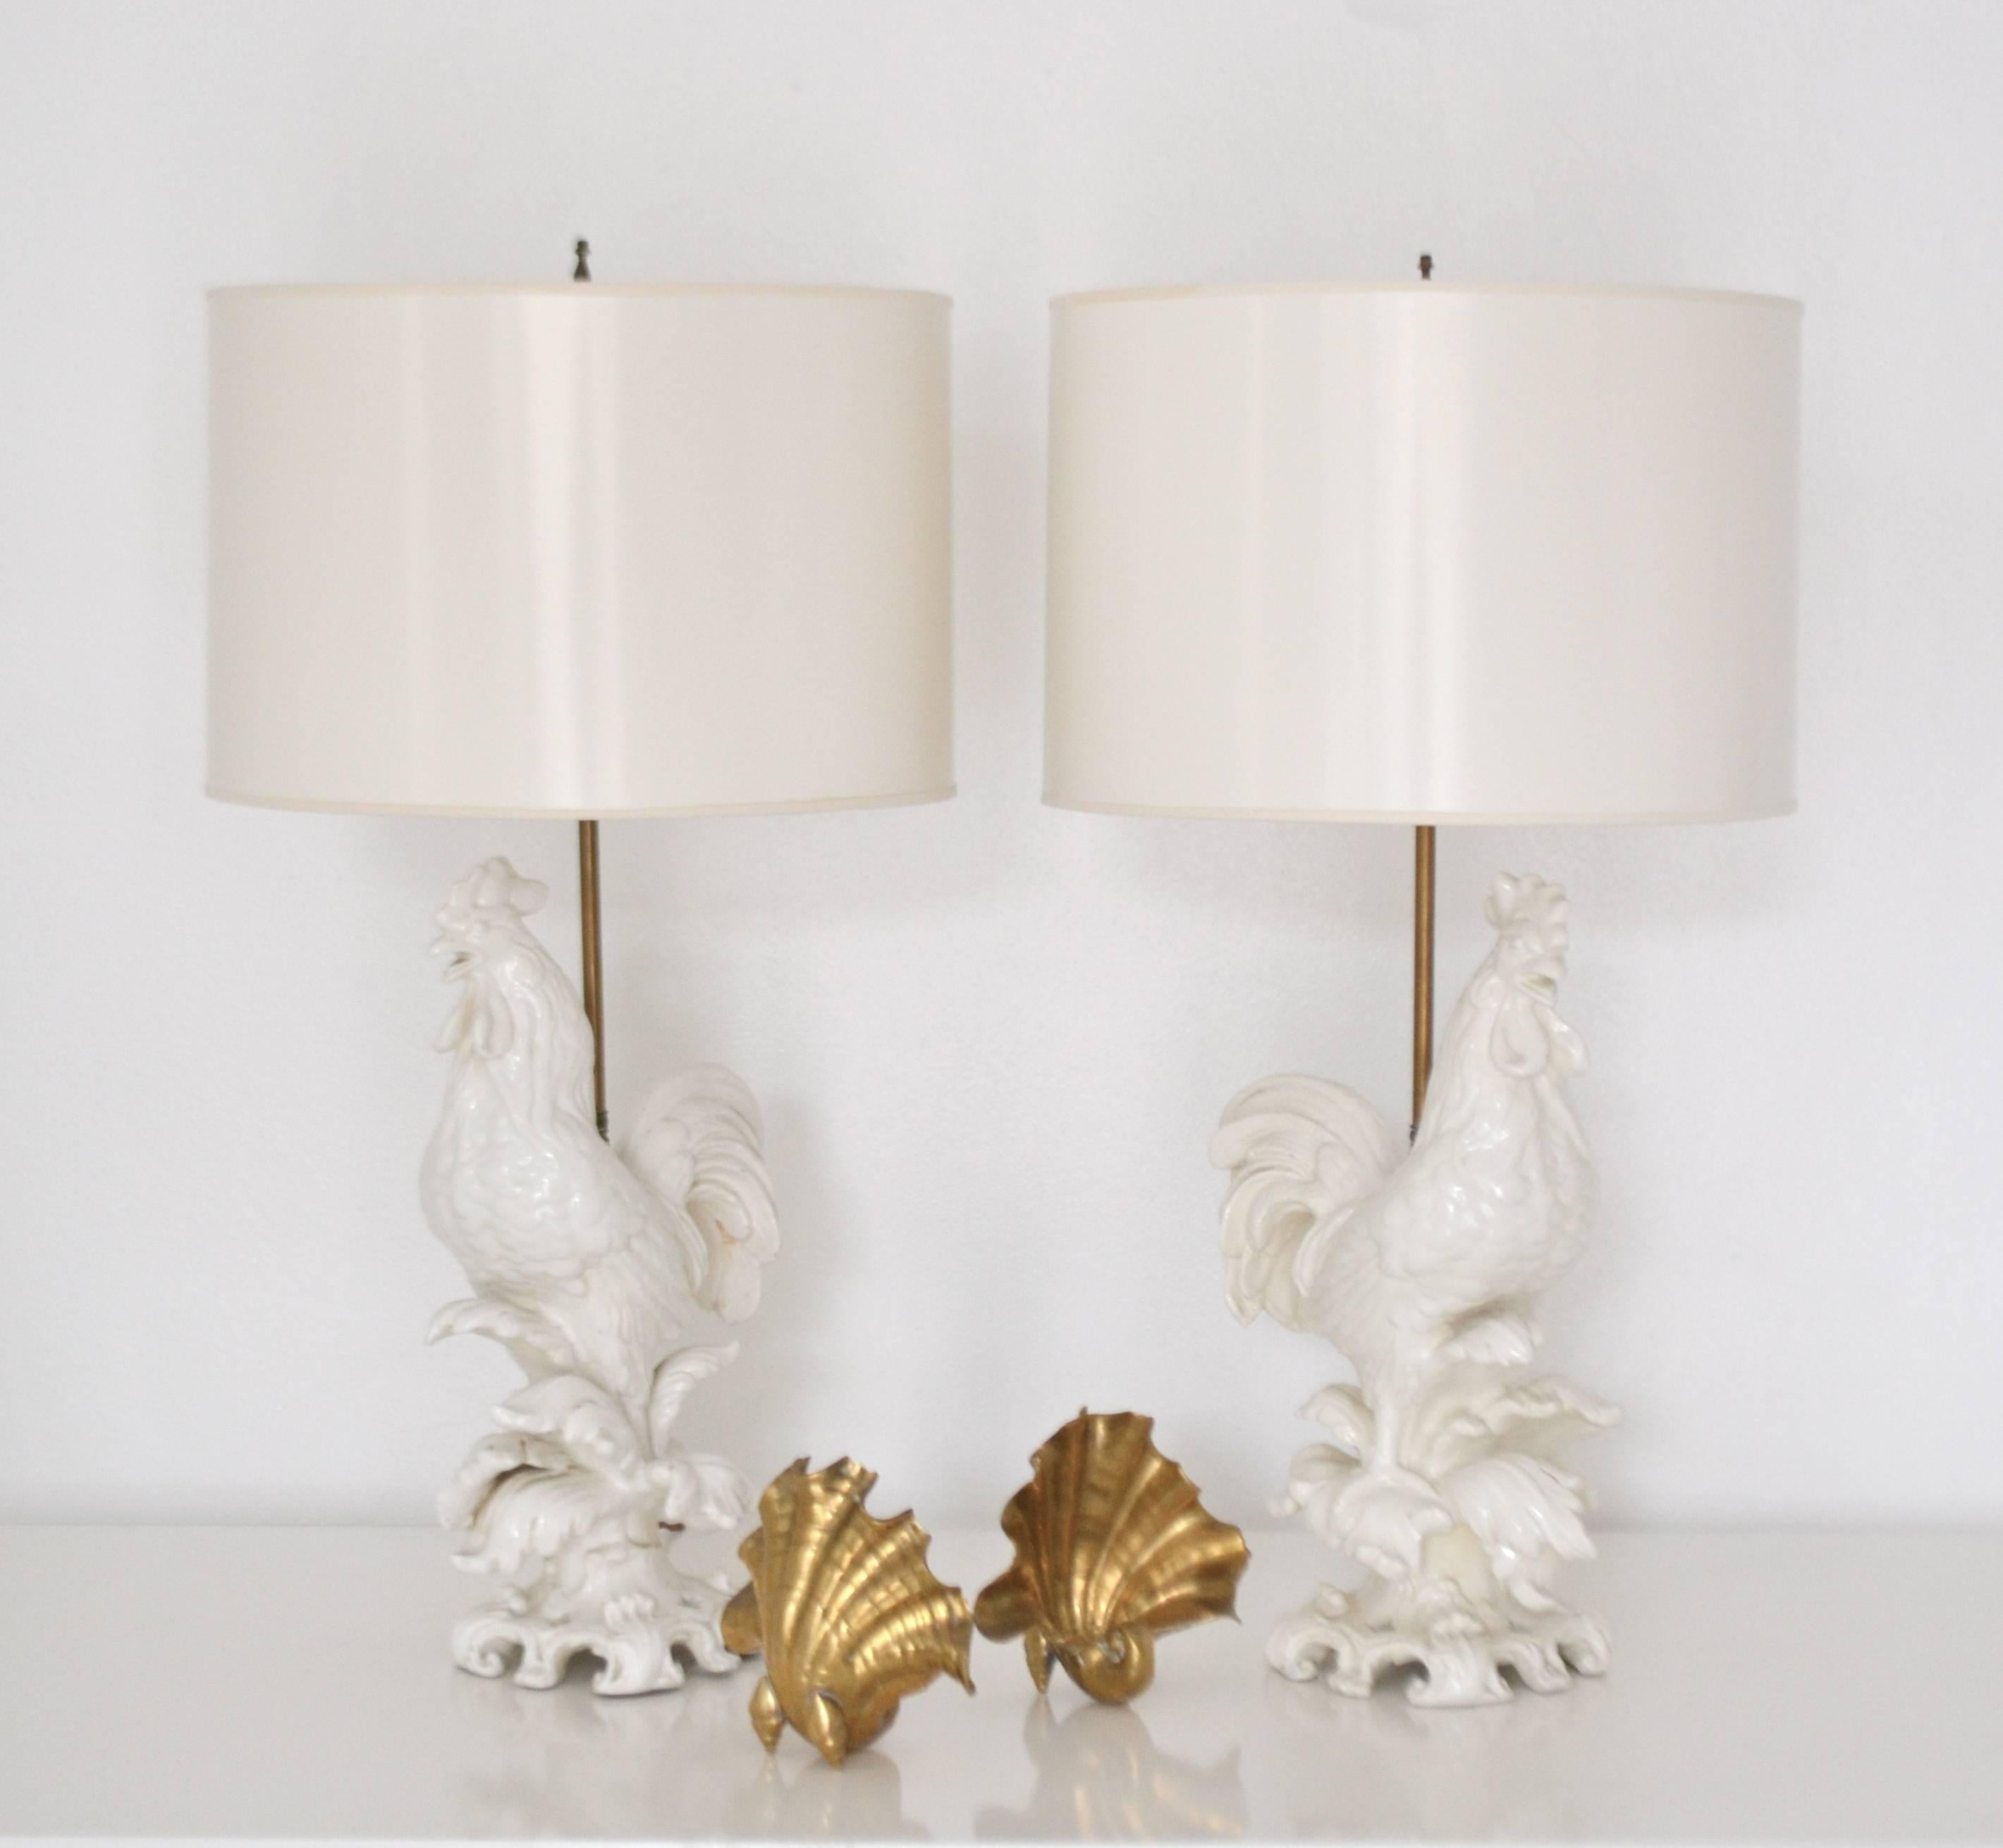 Stunning pair of midcentury Italian Blanc de Chine ceramic rooster form table lamps, circa 1950s-1960s. These highly decorative hand thrown figural lamps are rewired with brass fittings and silk cords. Shades not included.